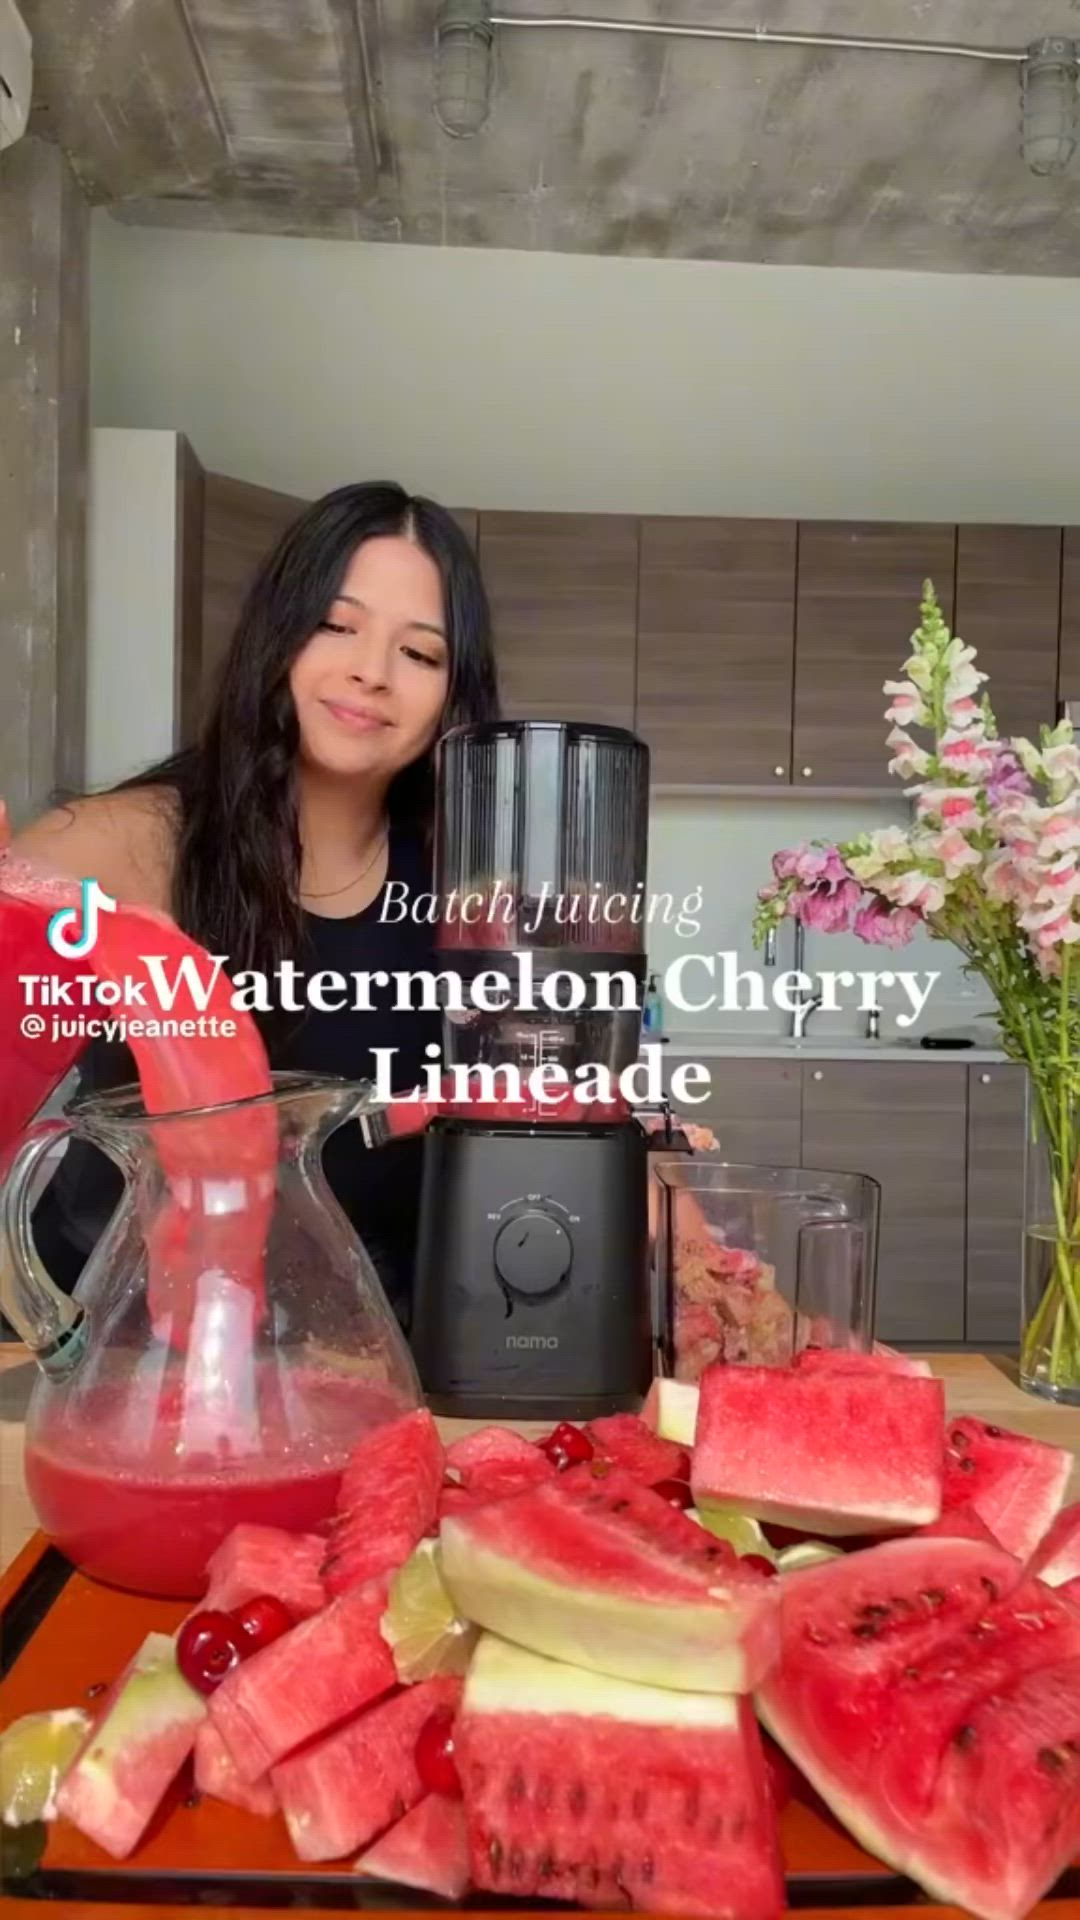 This may contain: a woman is making watermelon cherry limeade